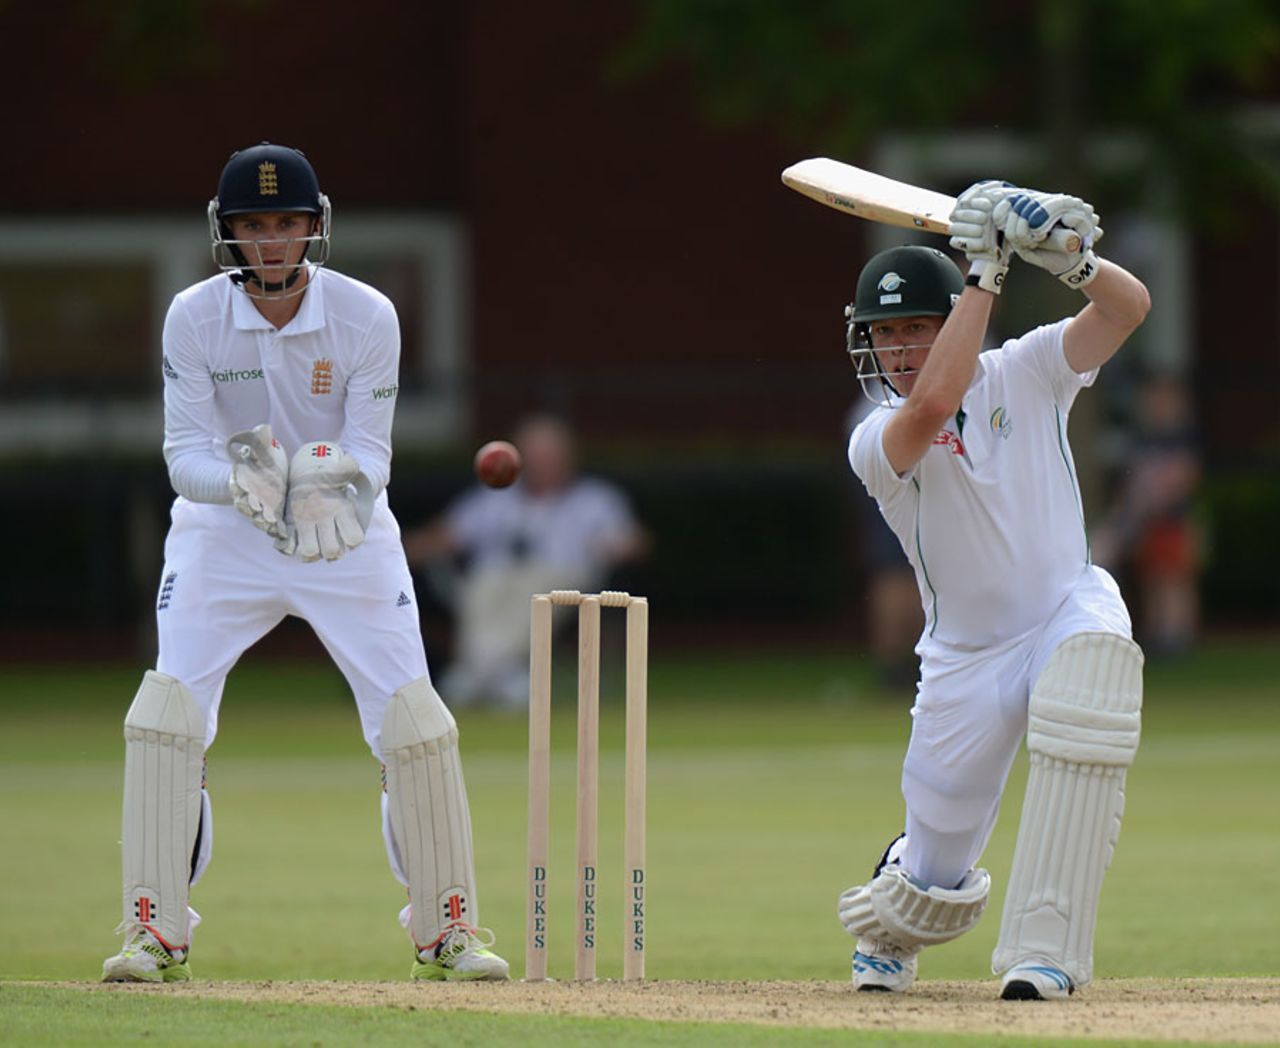 Grant Roelofsen finished the opening day unbeaten on 96, England U-19 v South Africa U-19, 1st Test, Cambridge, August 1, 2014